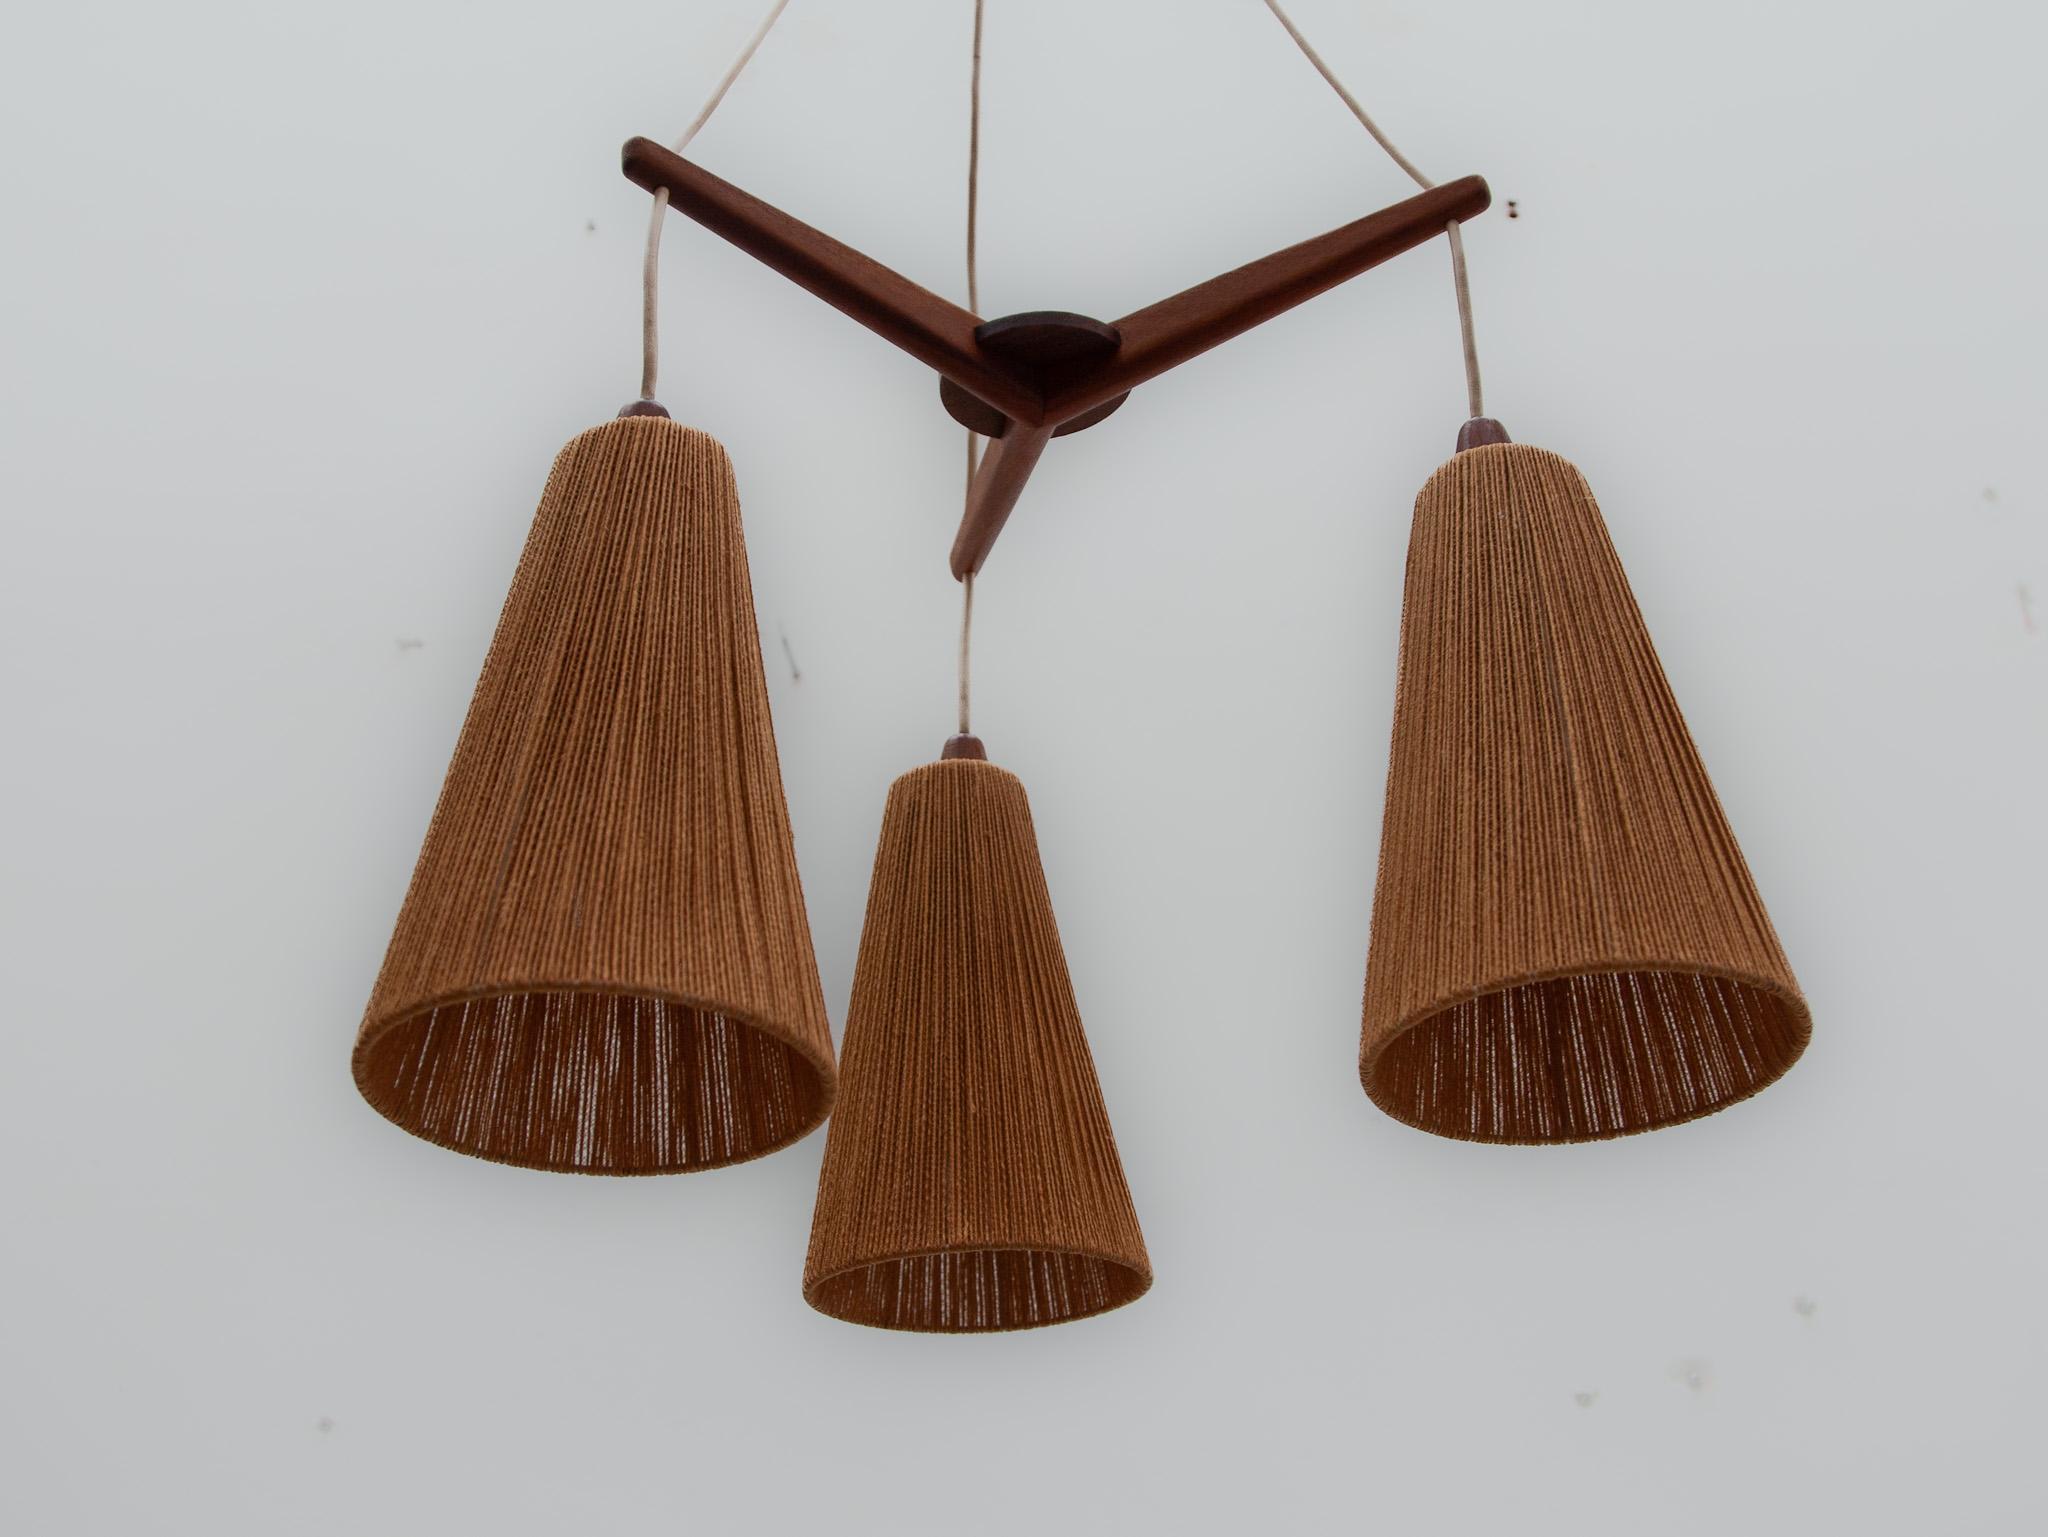 Teak and Jute Cord Pendant Cascade Lamp by Temde, Germany, 1960s For Sale 2